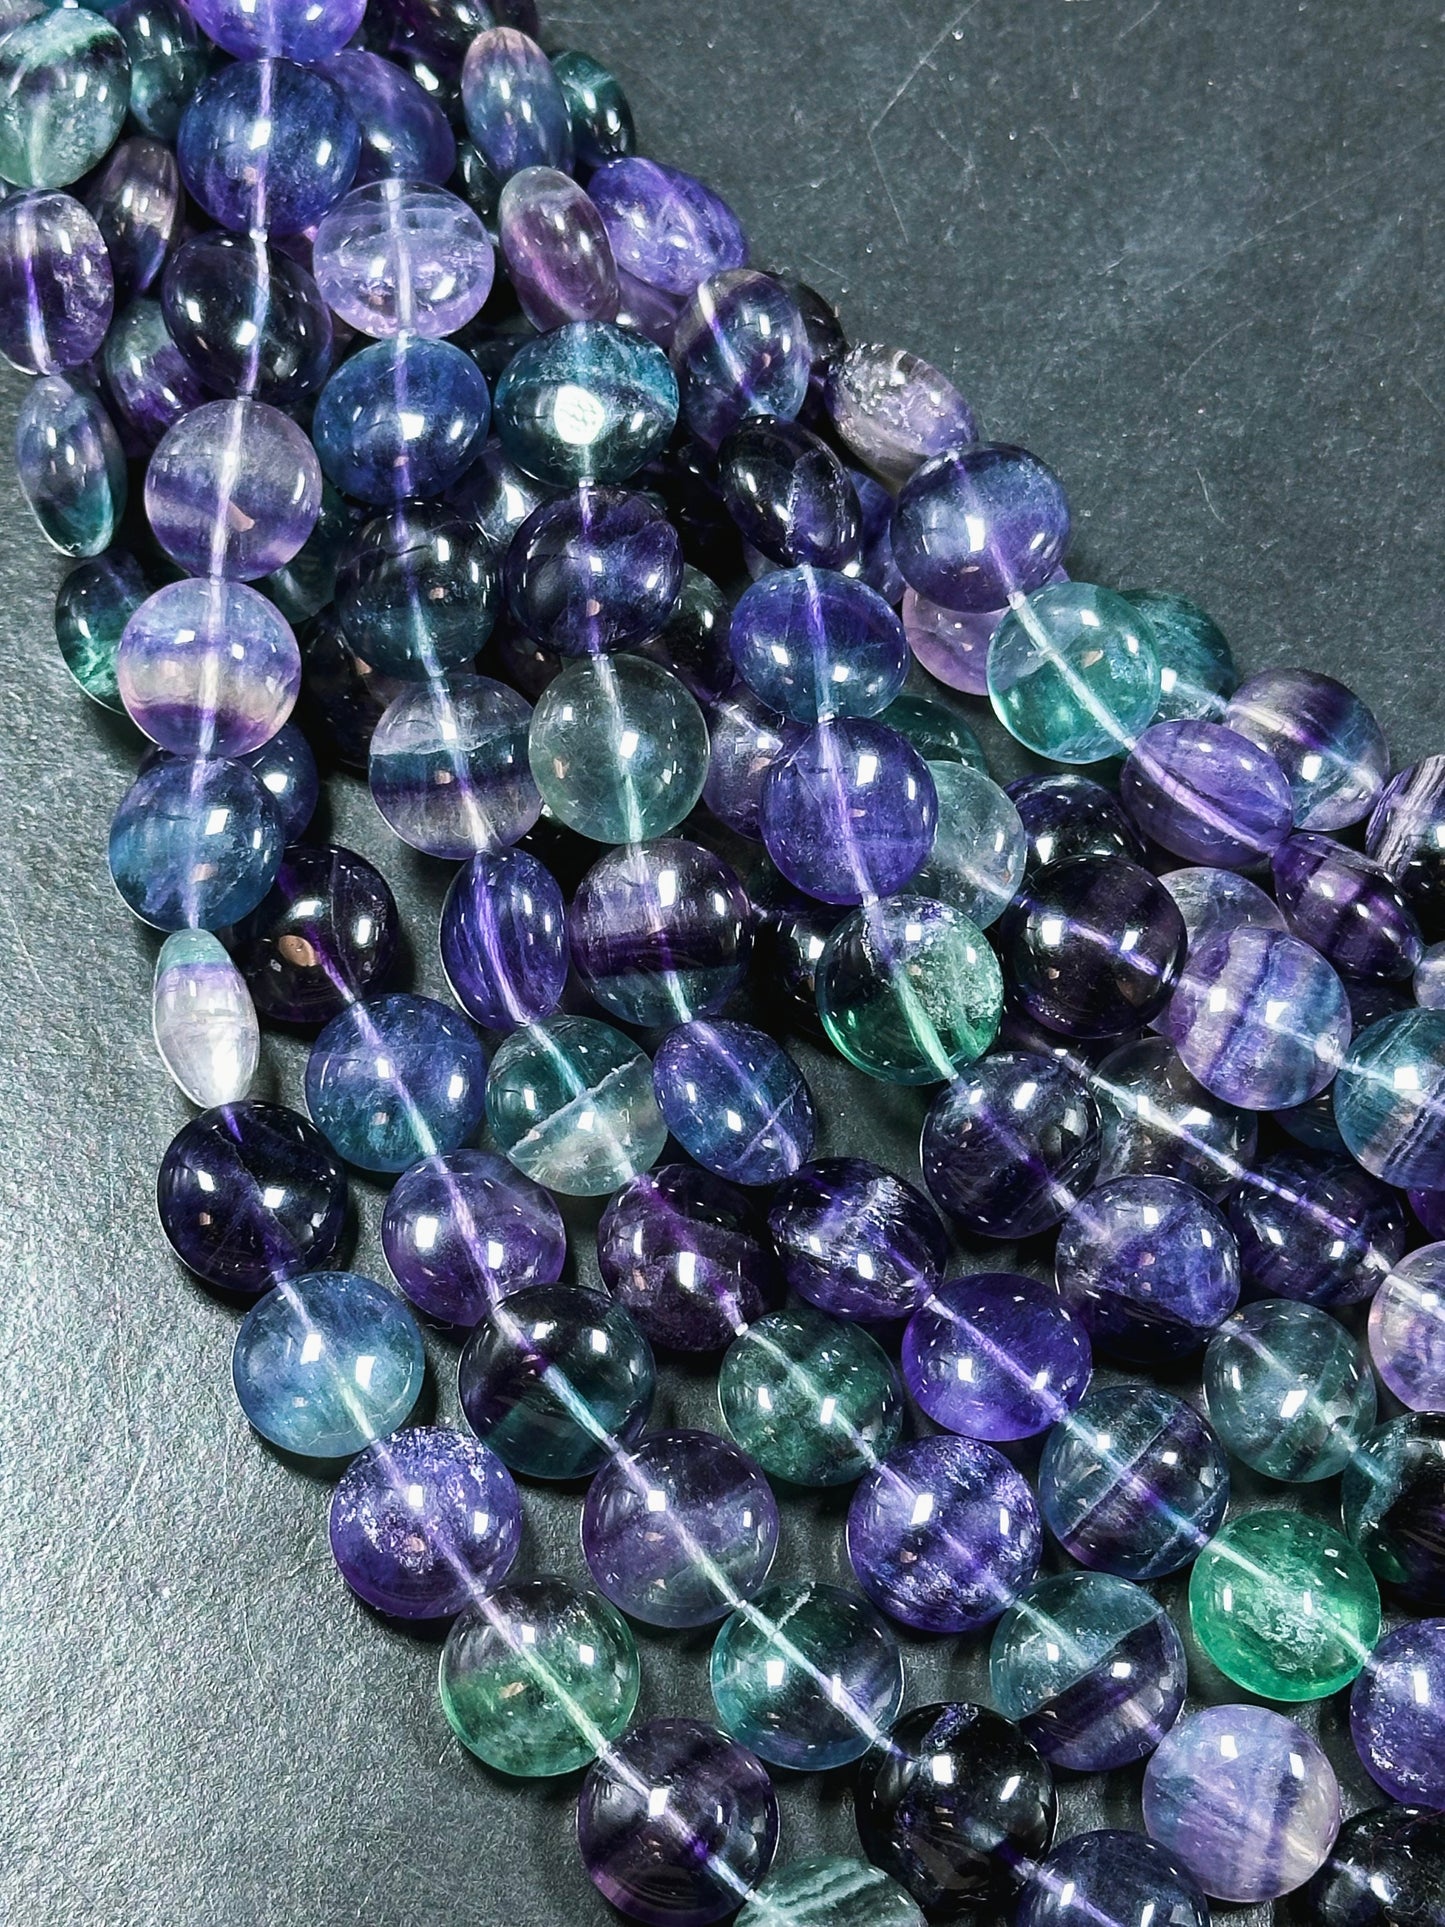 AAA Natural Fluorite Gemstone Bead 14mm Coin Shape, Beautiful Natural Purple Green Color Fluorite Gemstone Bead, Excellent Quality 15.5"